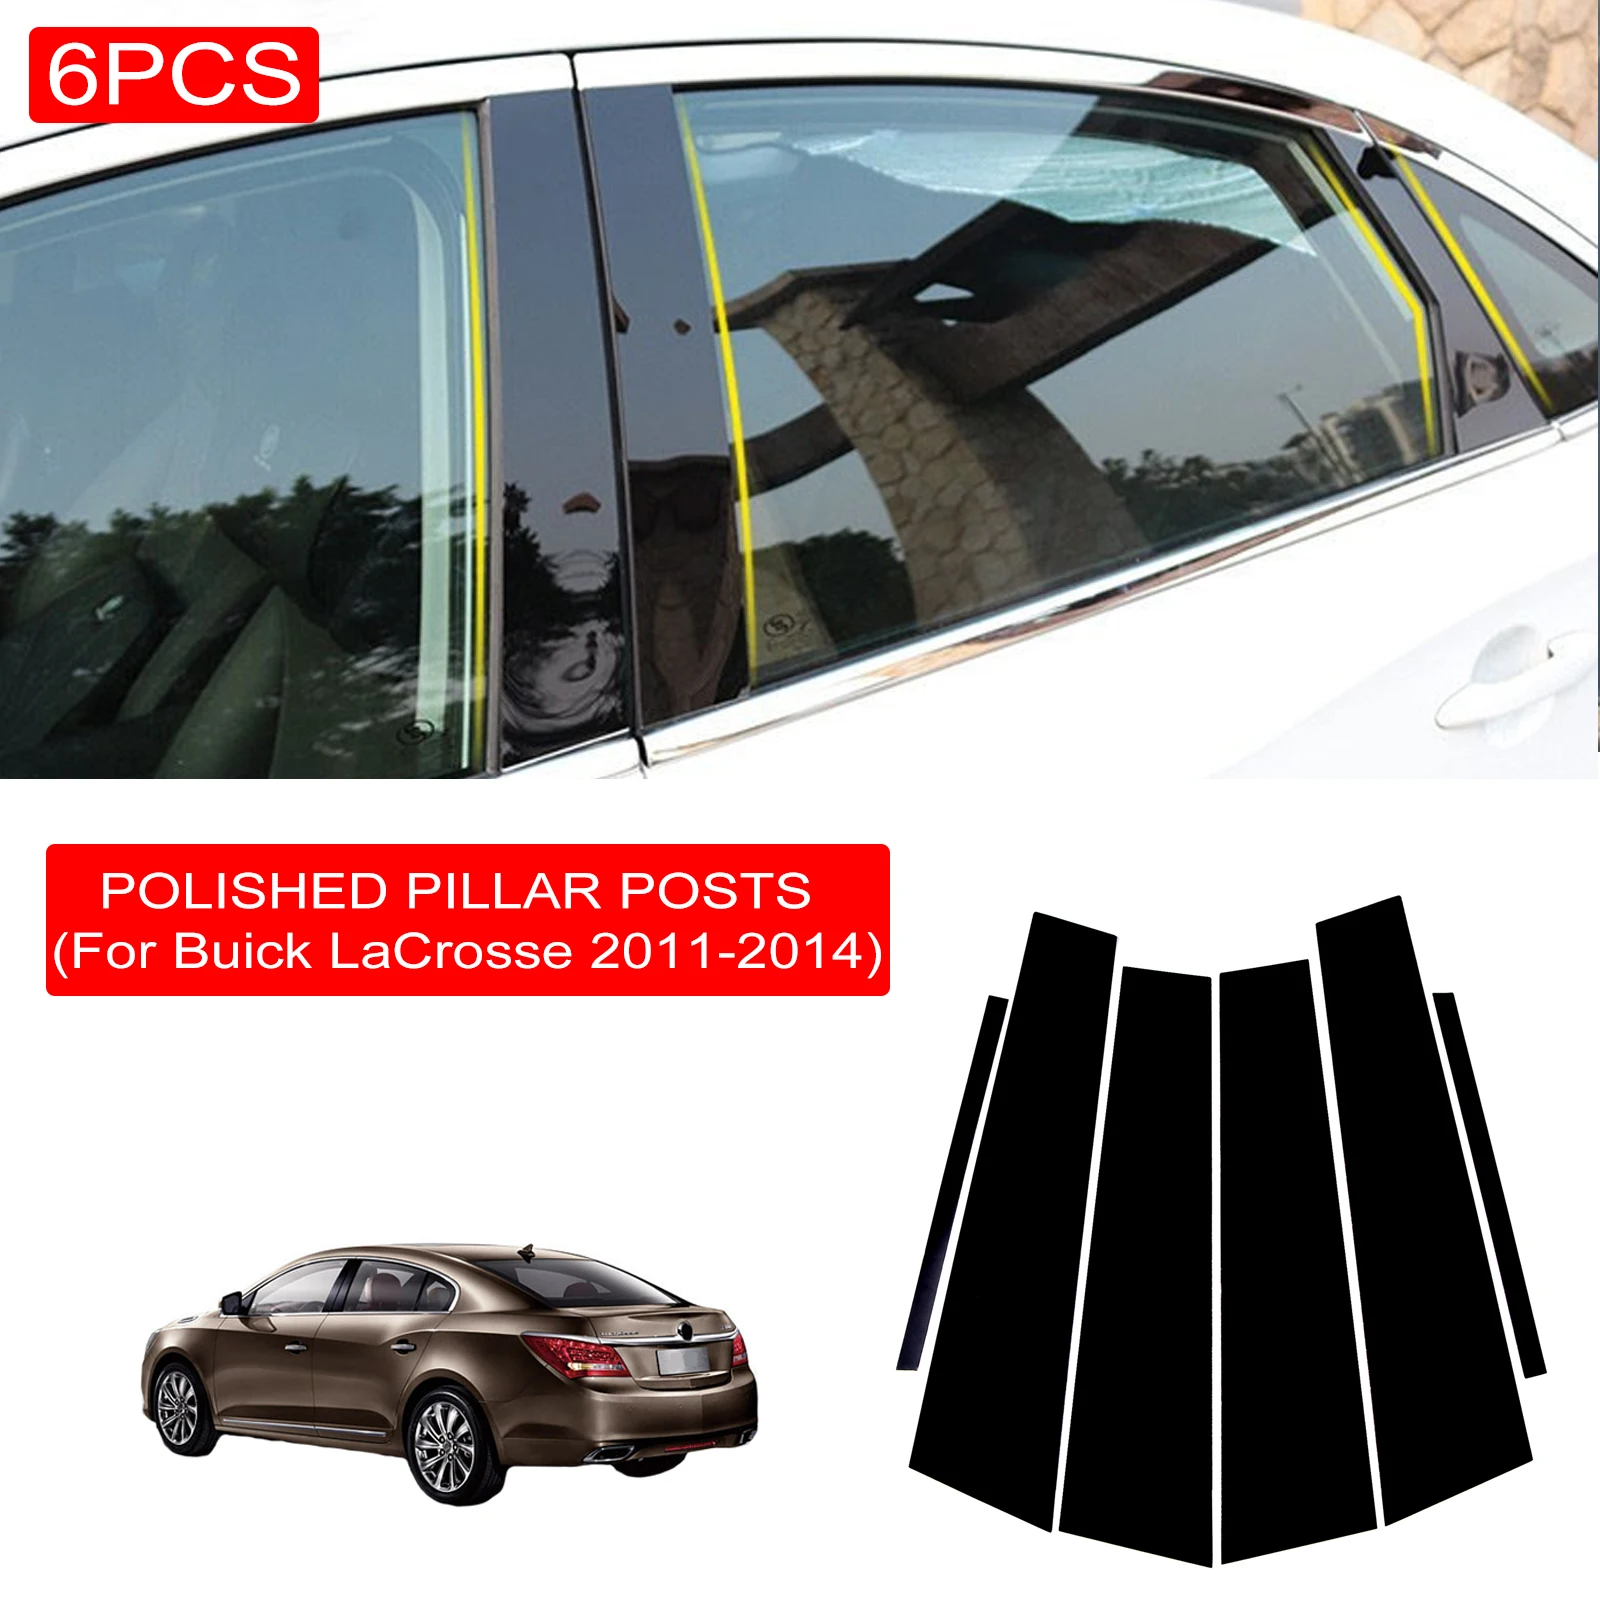 

6PCS Polished Pillar Posts Fit for Buick Lacrosse 2011-2014 Window Trim Cover BC column sticker Chromium Styling